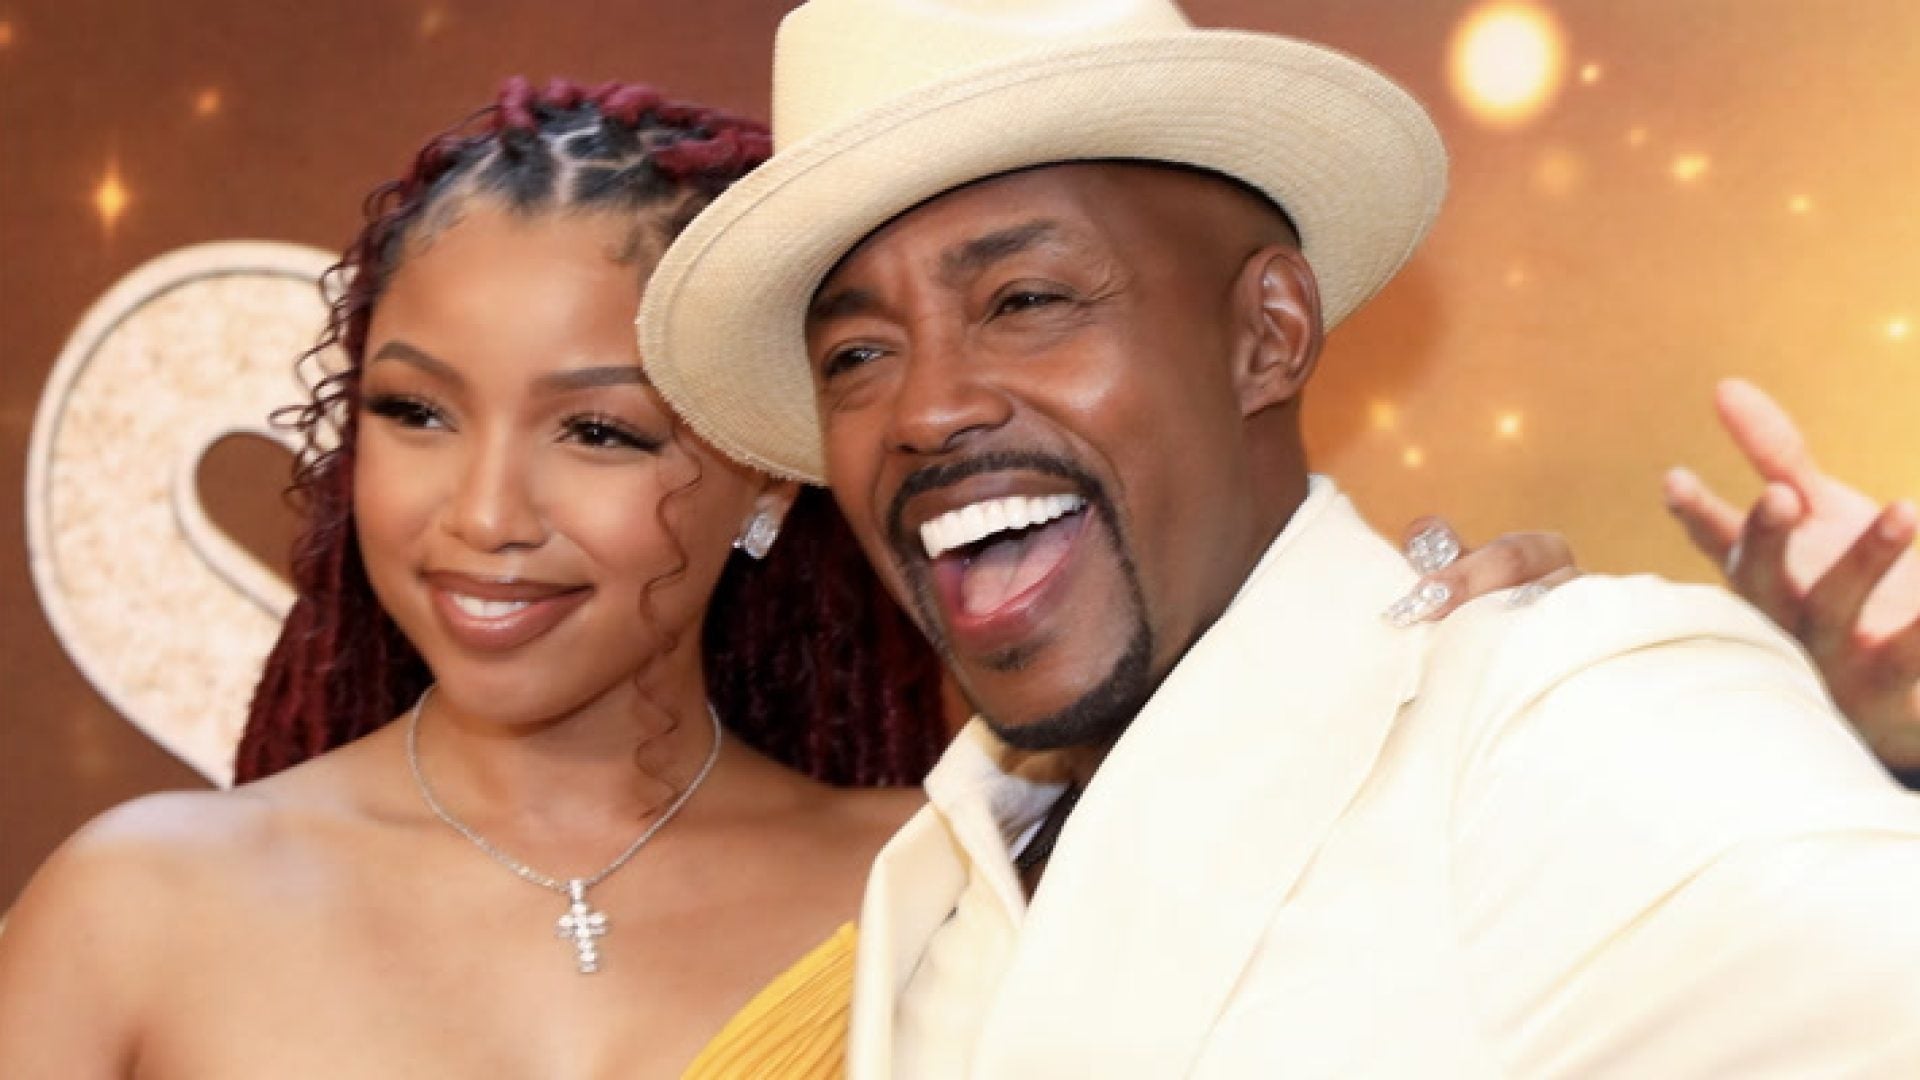 WATCH: Will Packer on Making Movies for All Audiences Through a Black Lens